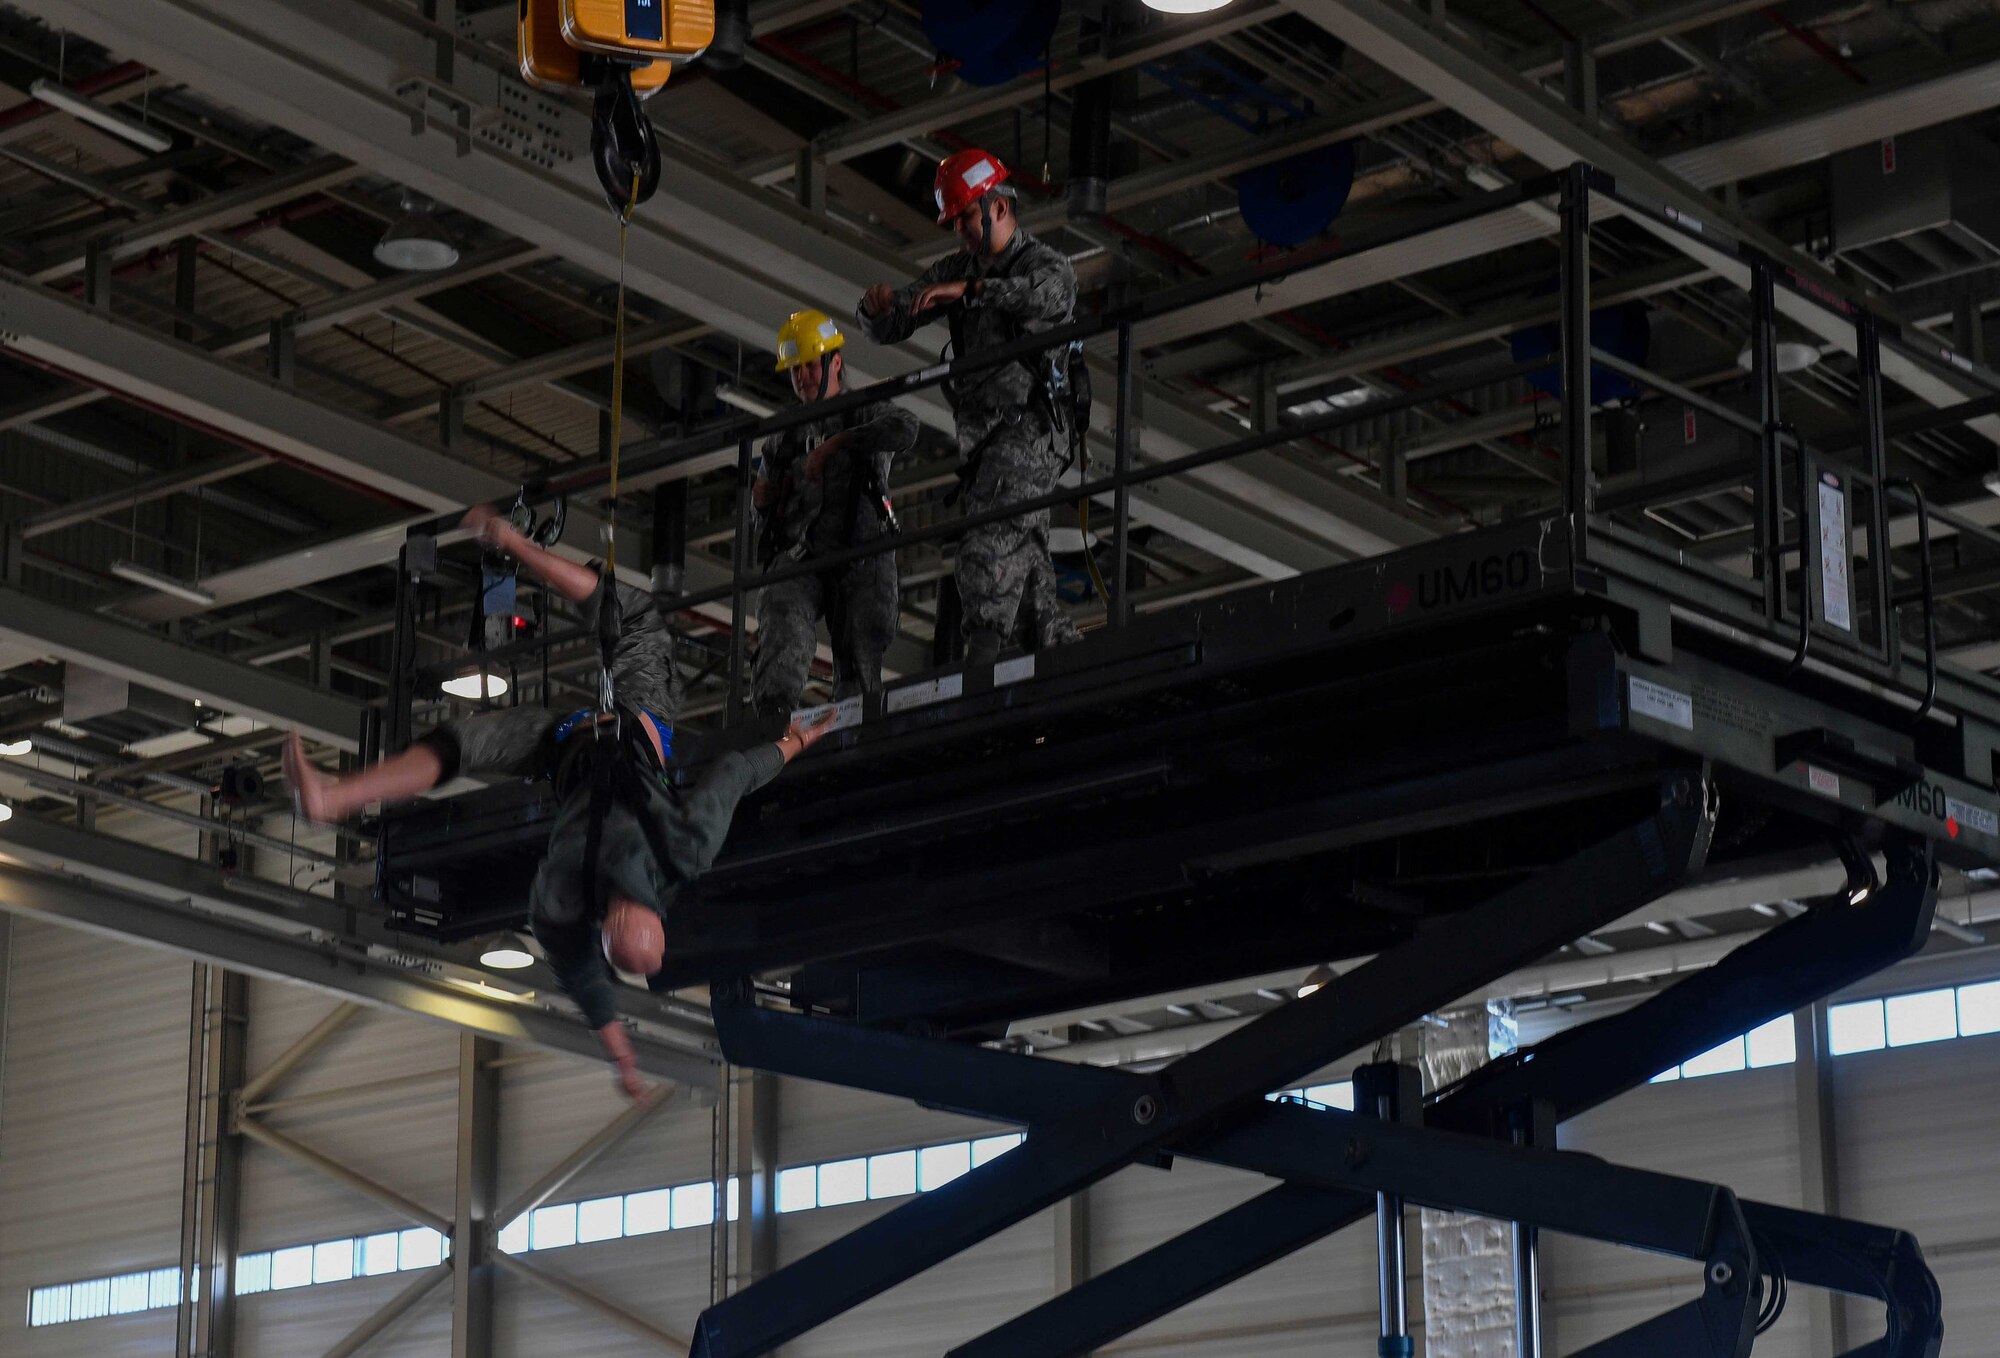 A 200-pound dummy drops from a platform to demonstrate a safety mechanism during the 721st Aircraft Maintenance Squadron's fall protection training on Ramstein Air Base, Germany, May 10, 2017. The Occupational Safety and Health Administration encouraged employers to participate in its National Fall Prevention Stand-Down, which was being held in conjunction with the North American Occupational Safety and Health Safety Week from May 8 to 12. (U.S. Air Force photo by Senior Airman Tryphena Mayhugh)